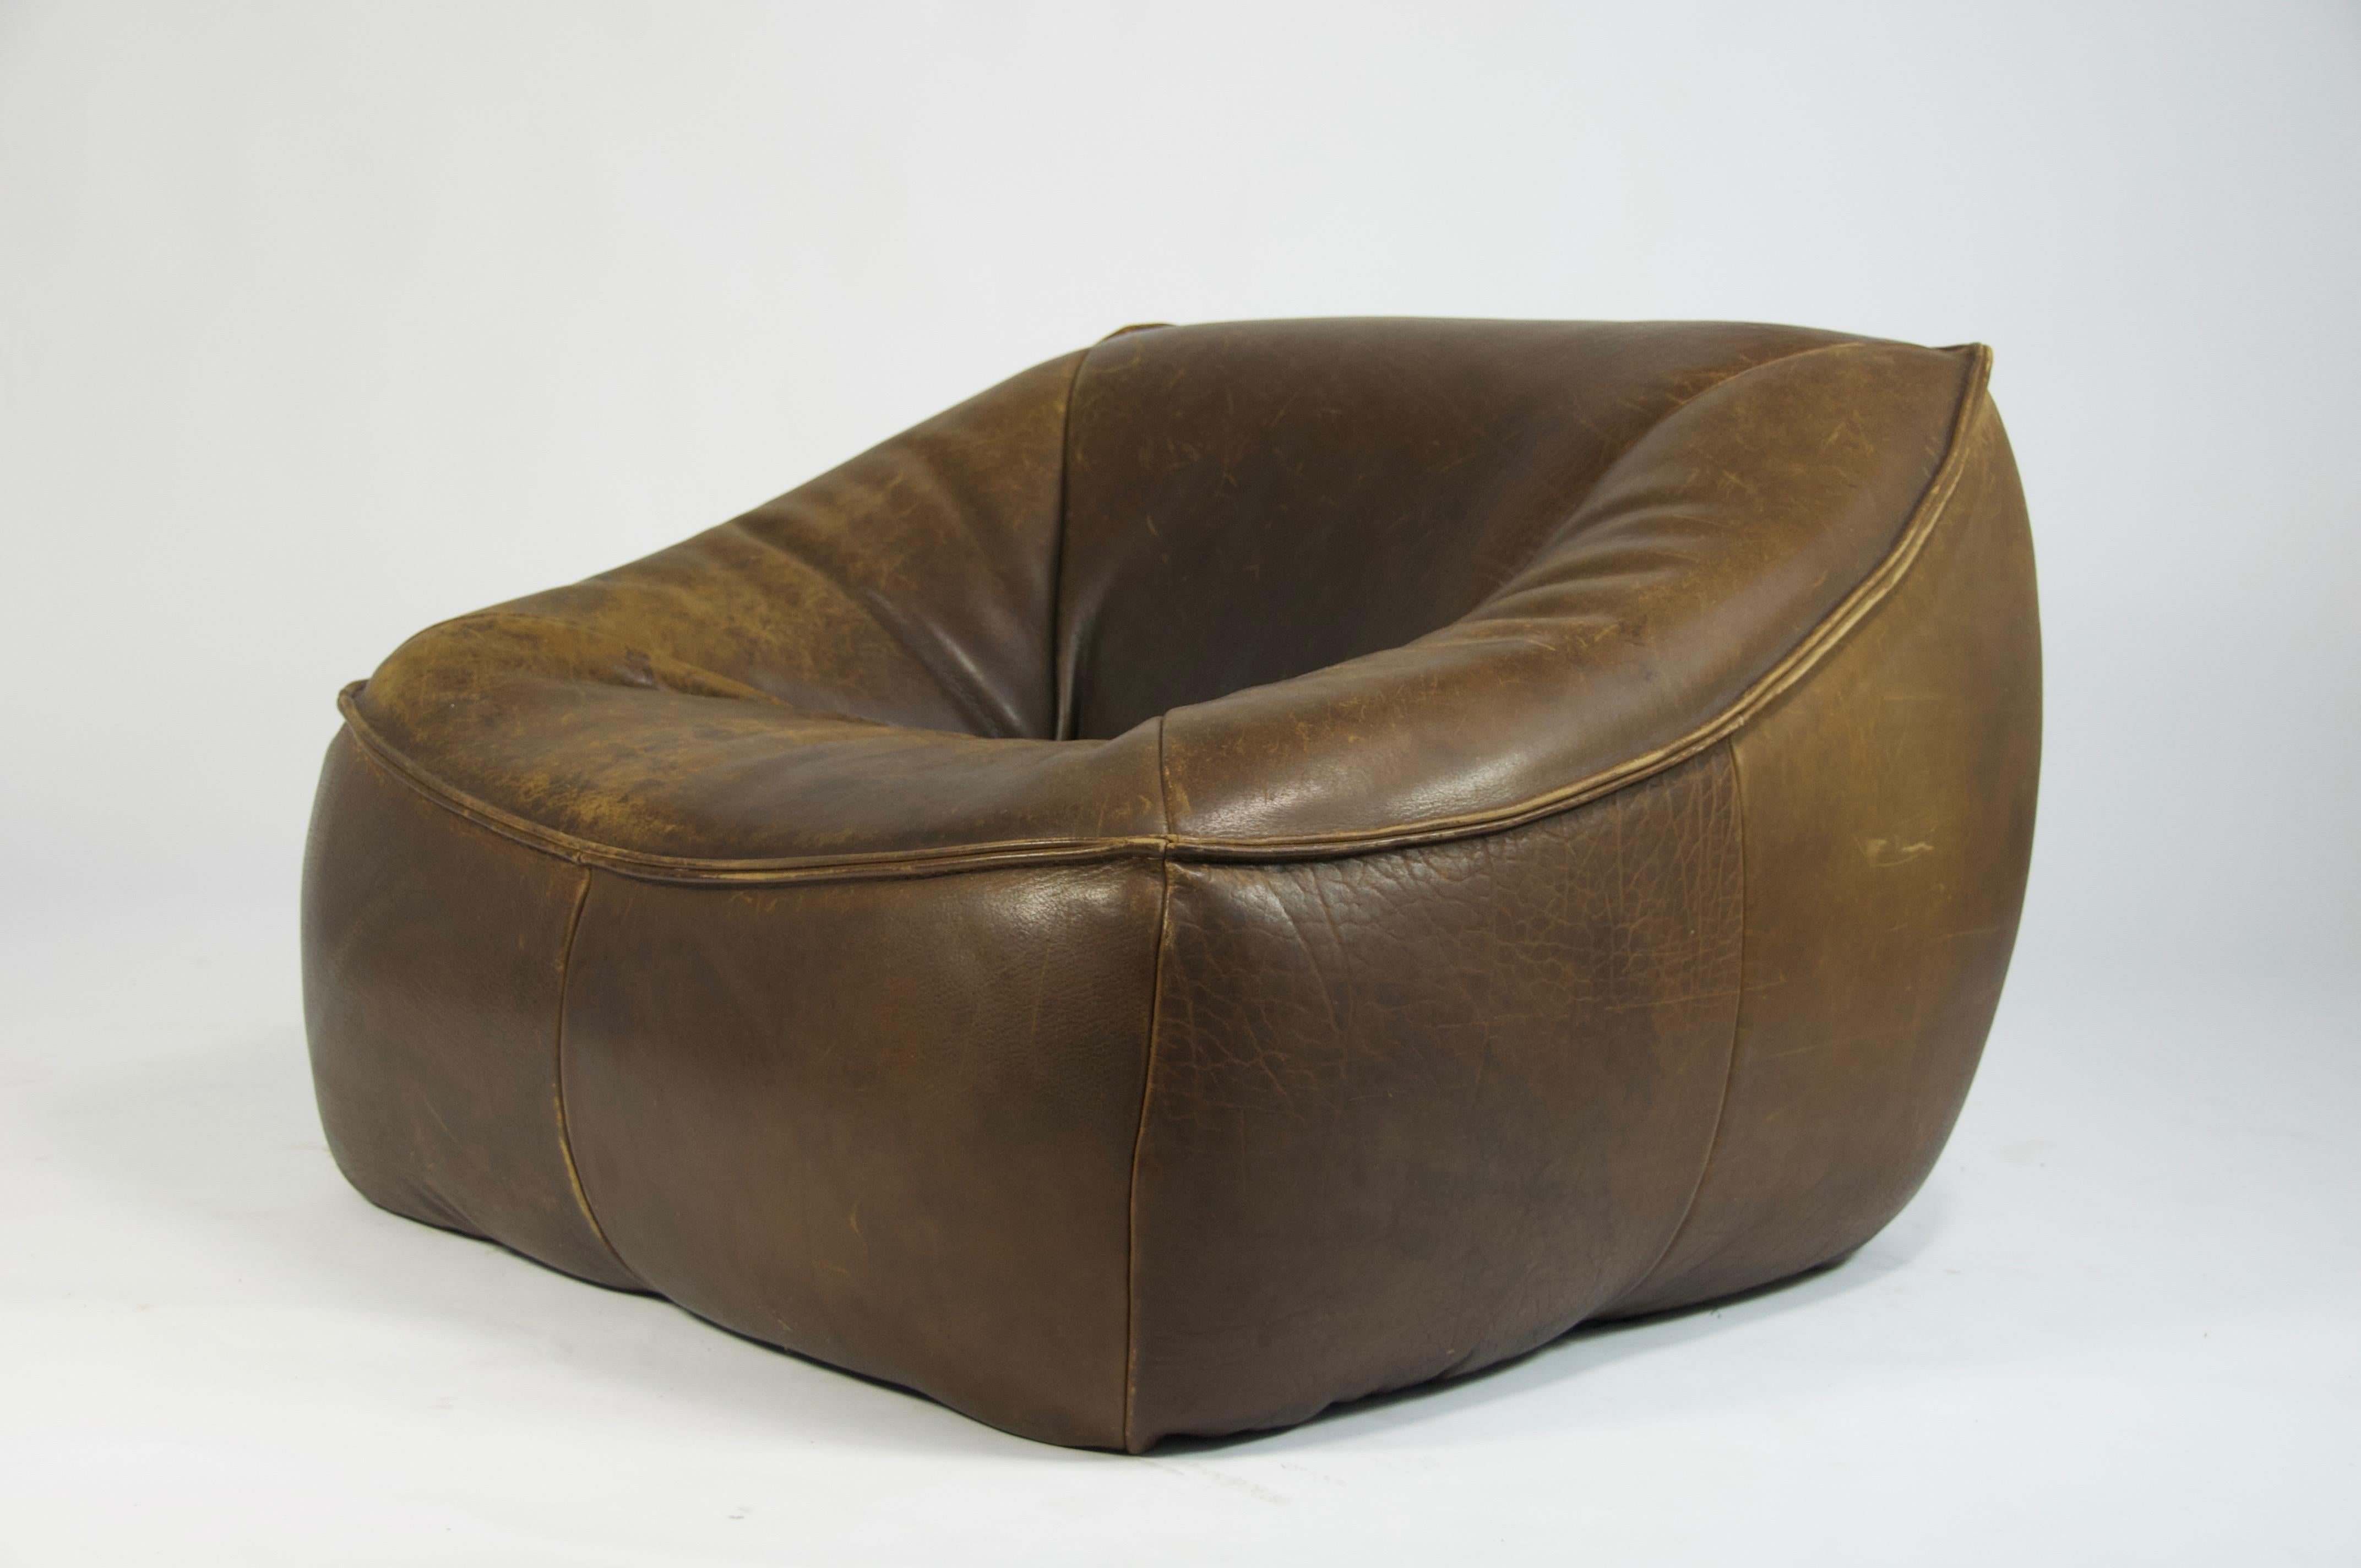 Gerard Van Den Berg Ringo leather lounge chair for Montis, 1970s
Original leather with nice patina.